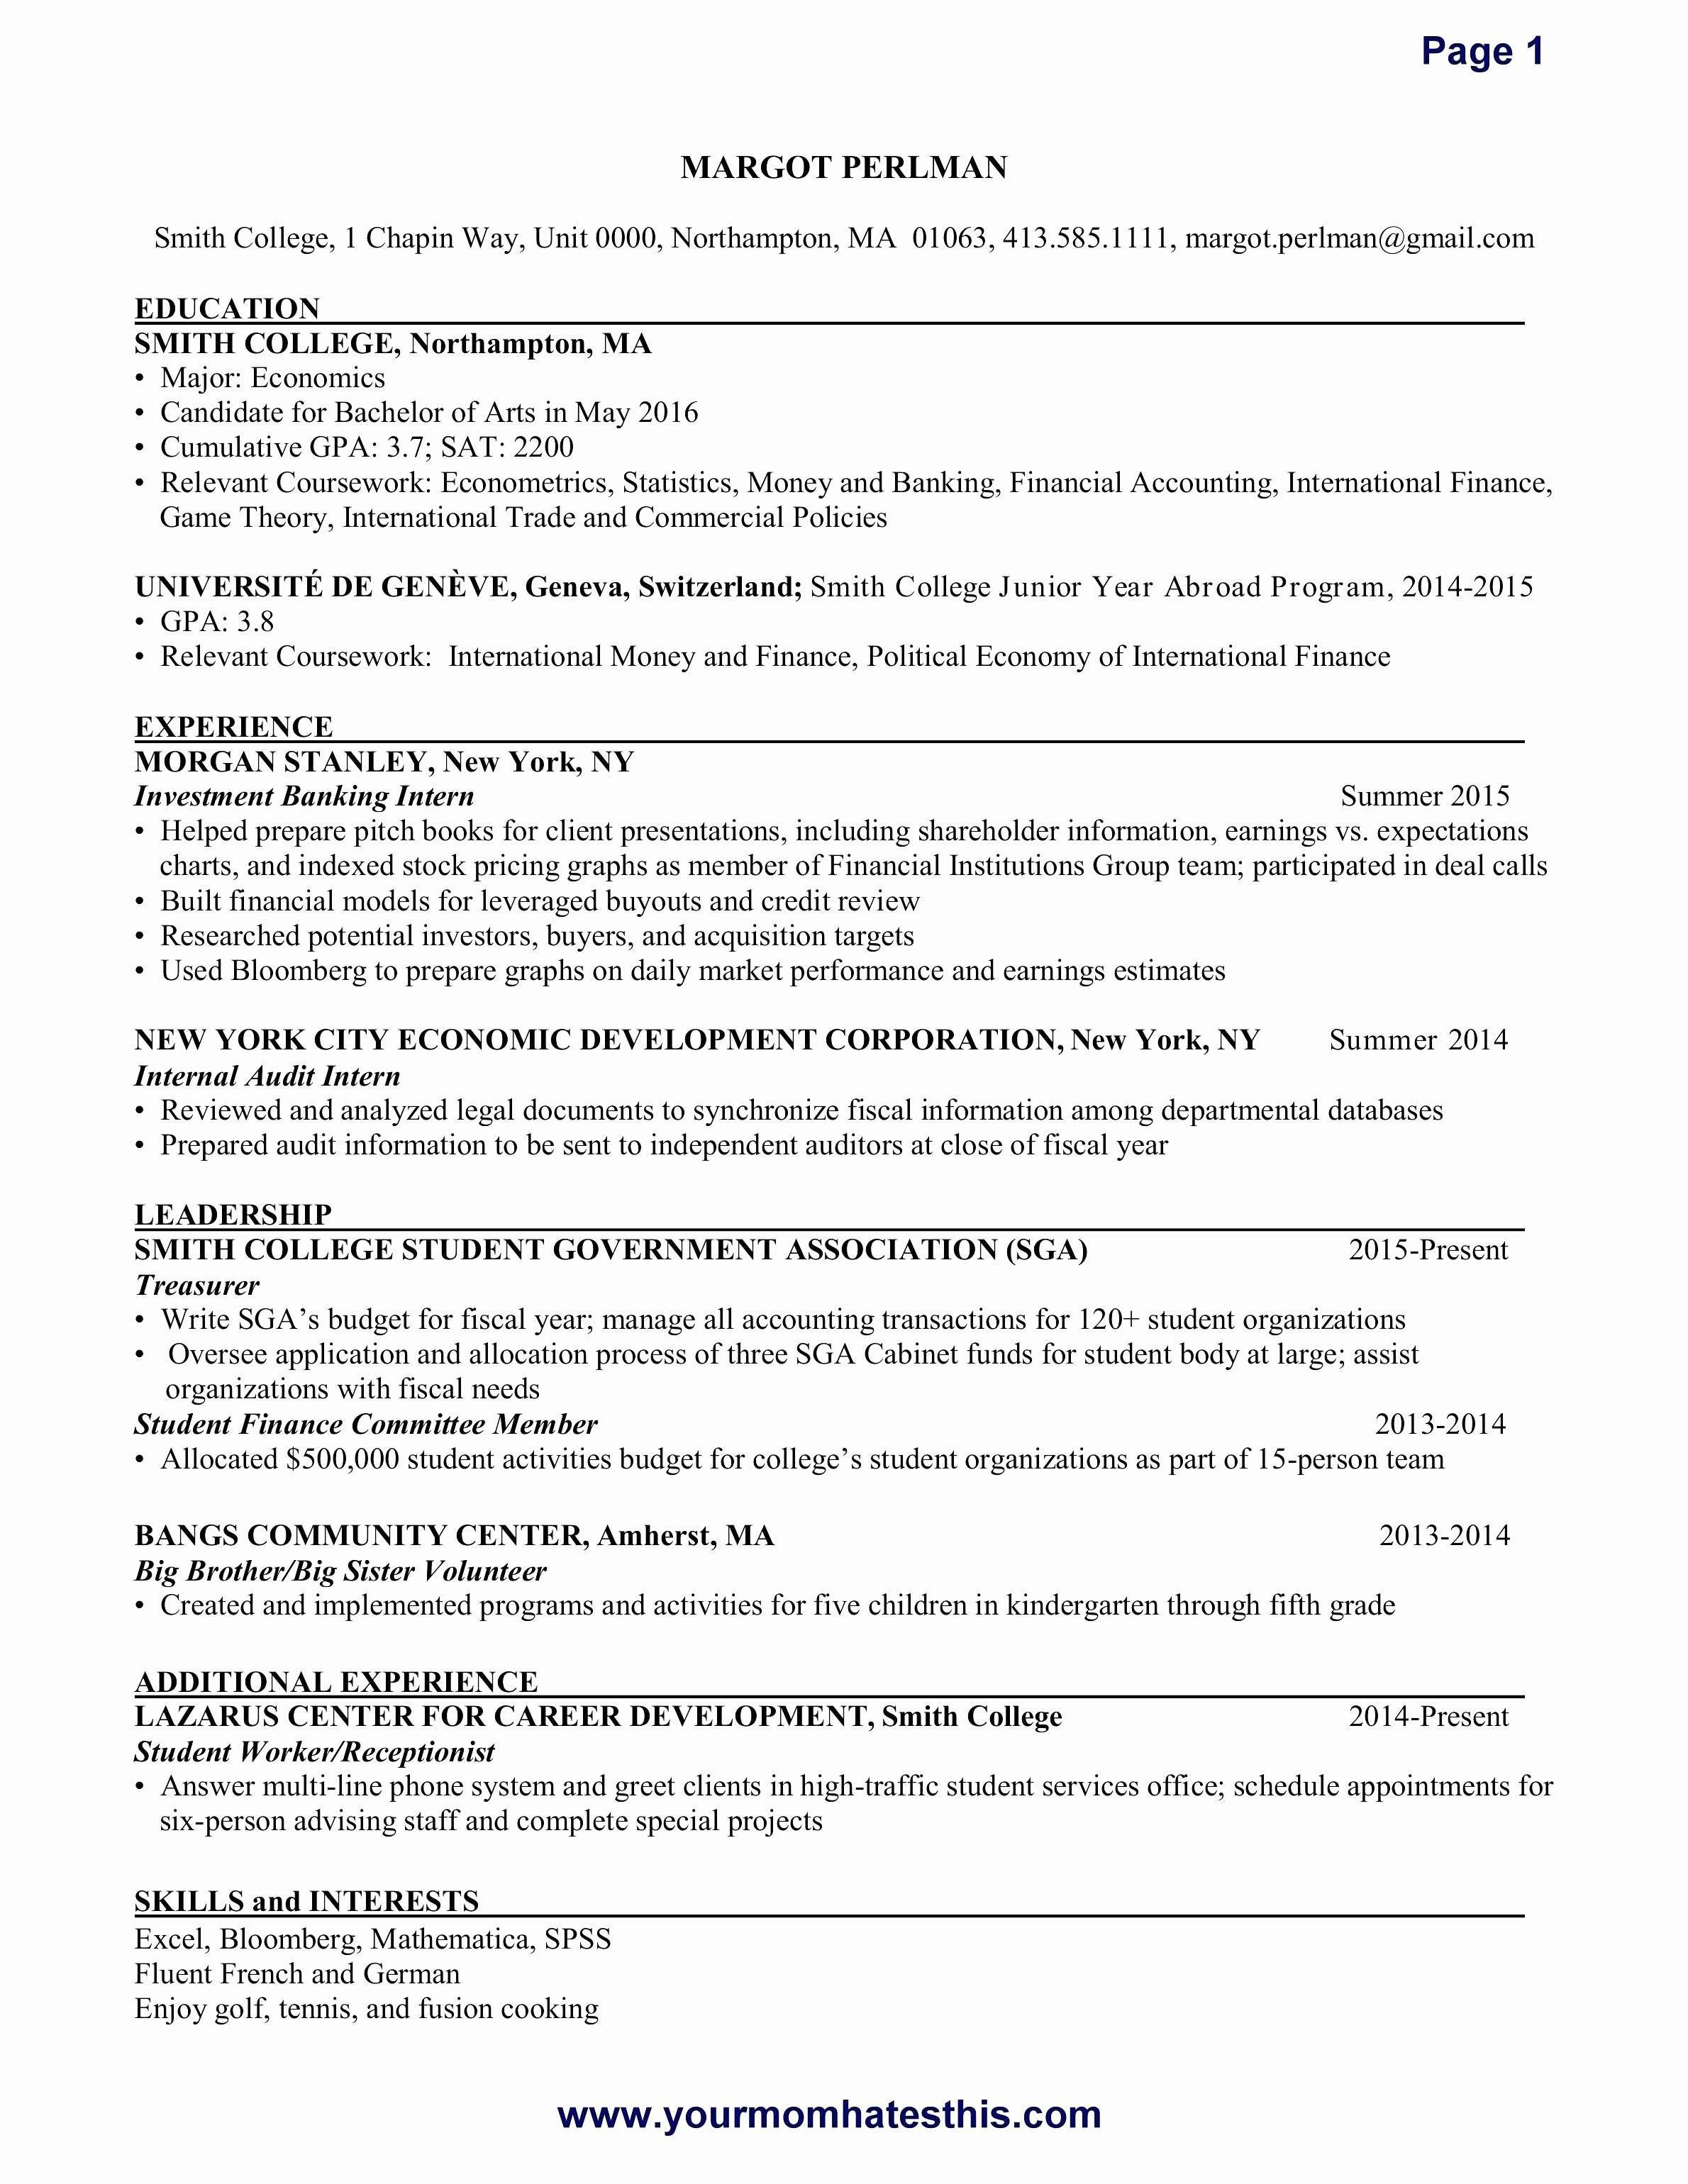 Entry Level Accounting Cover Letter Fresh 9 10 Entry Level Teaching Cover Letter